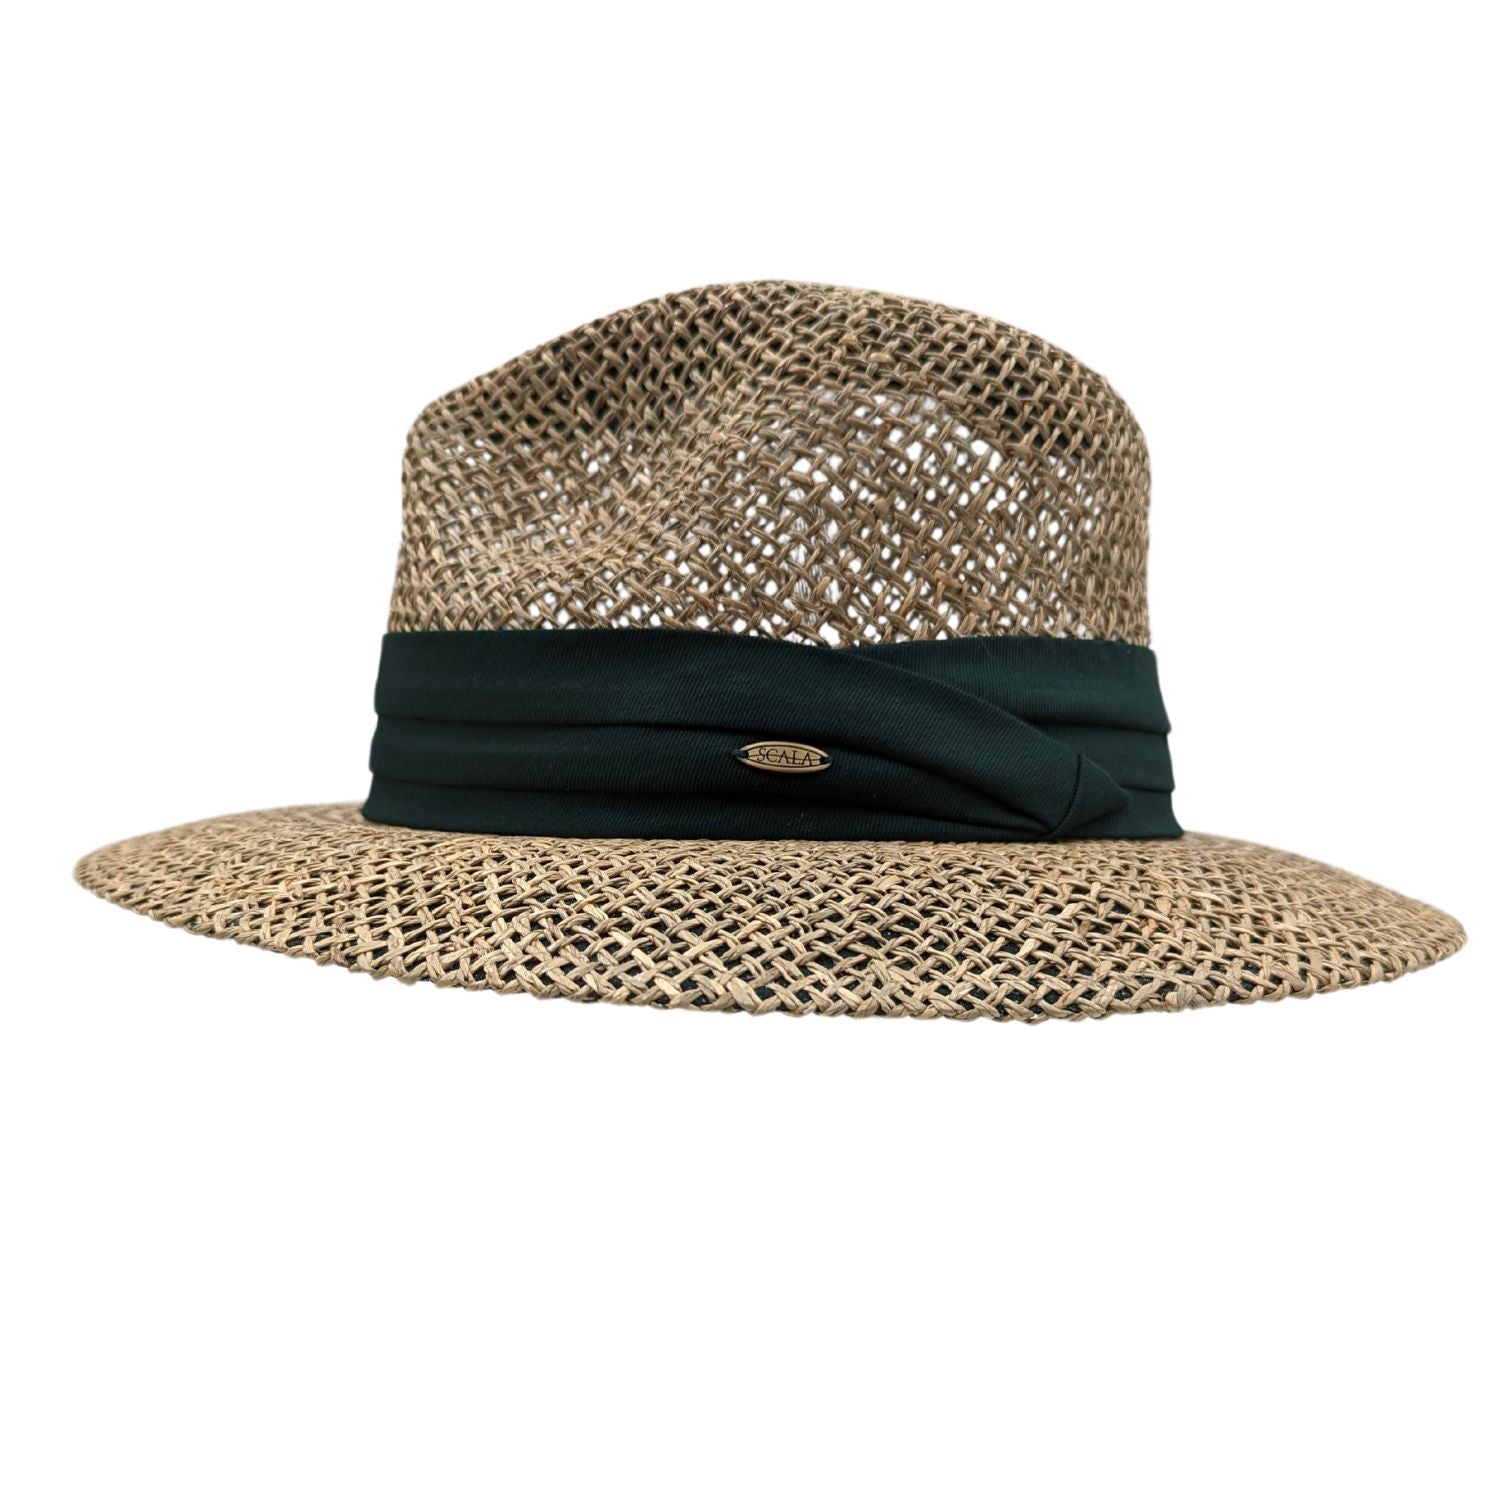 Men's Natural Twisted Seagrass Safari Hat with 3 Brim and Cotton Band in  Dark Green – Suits & More